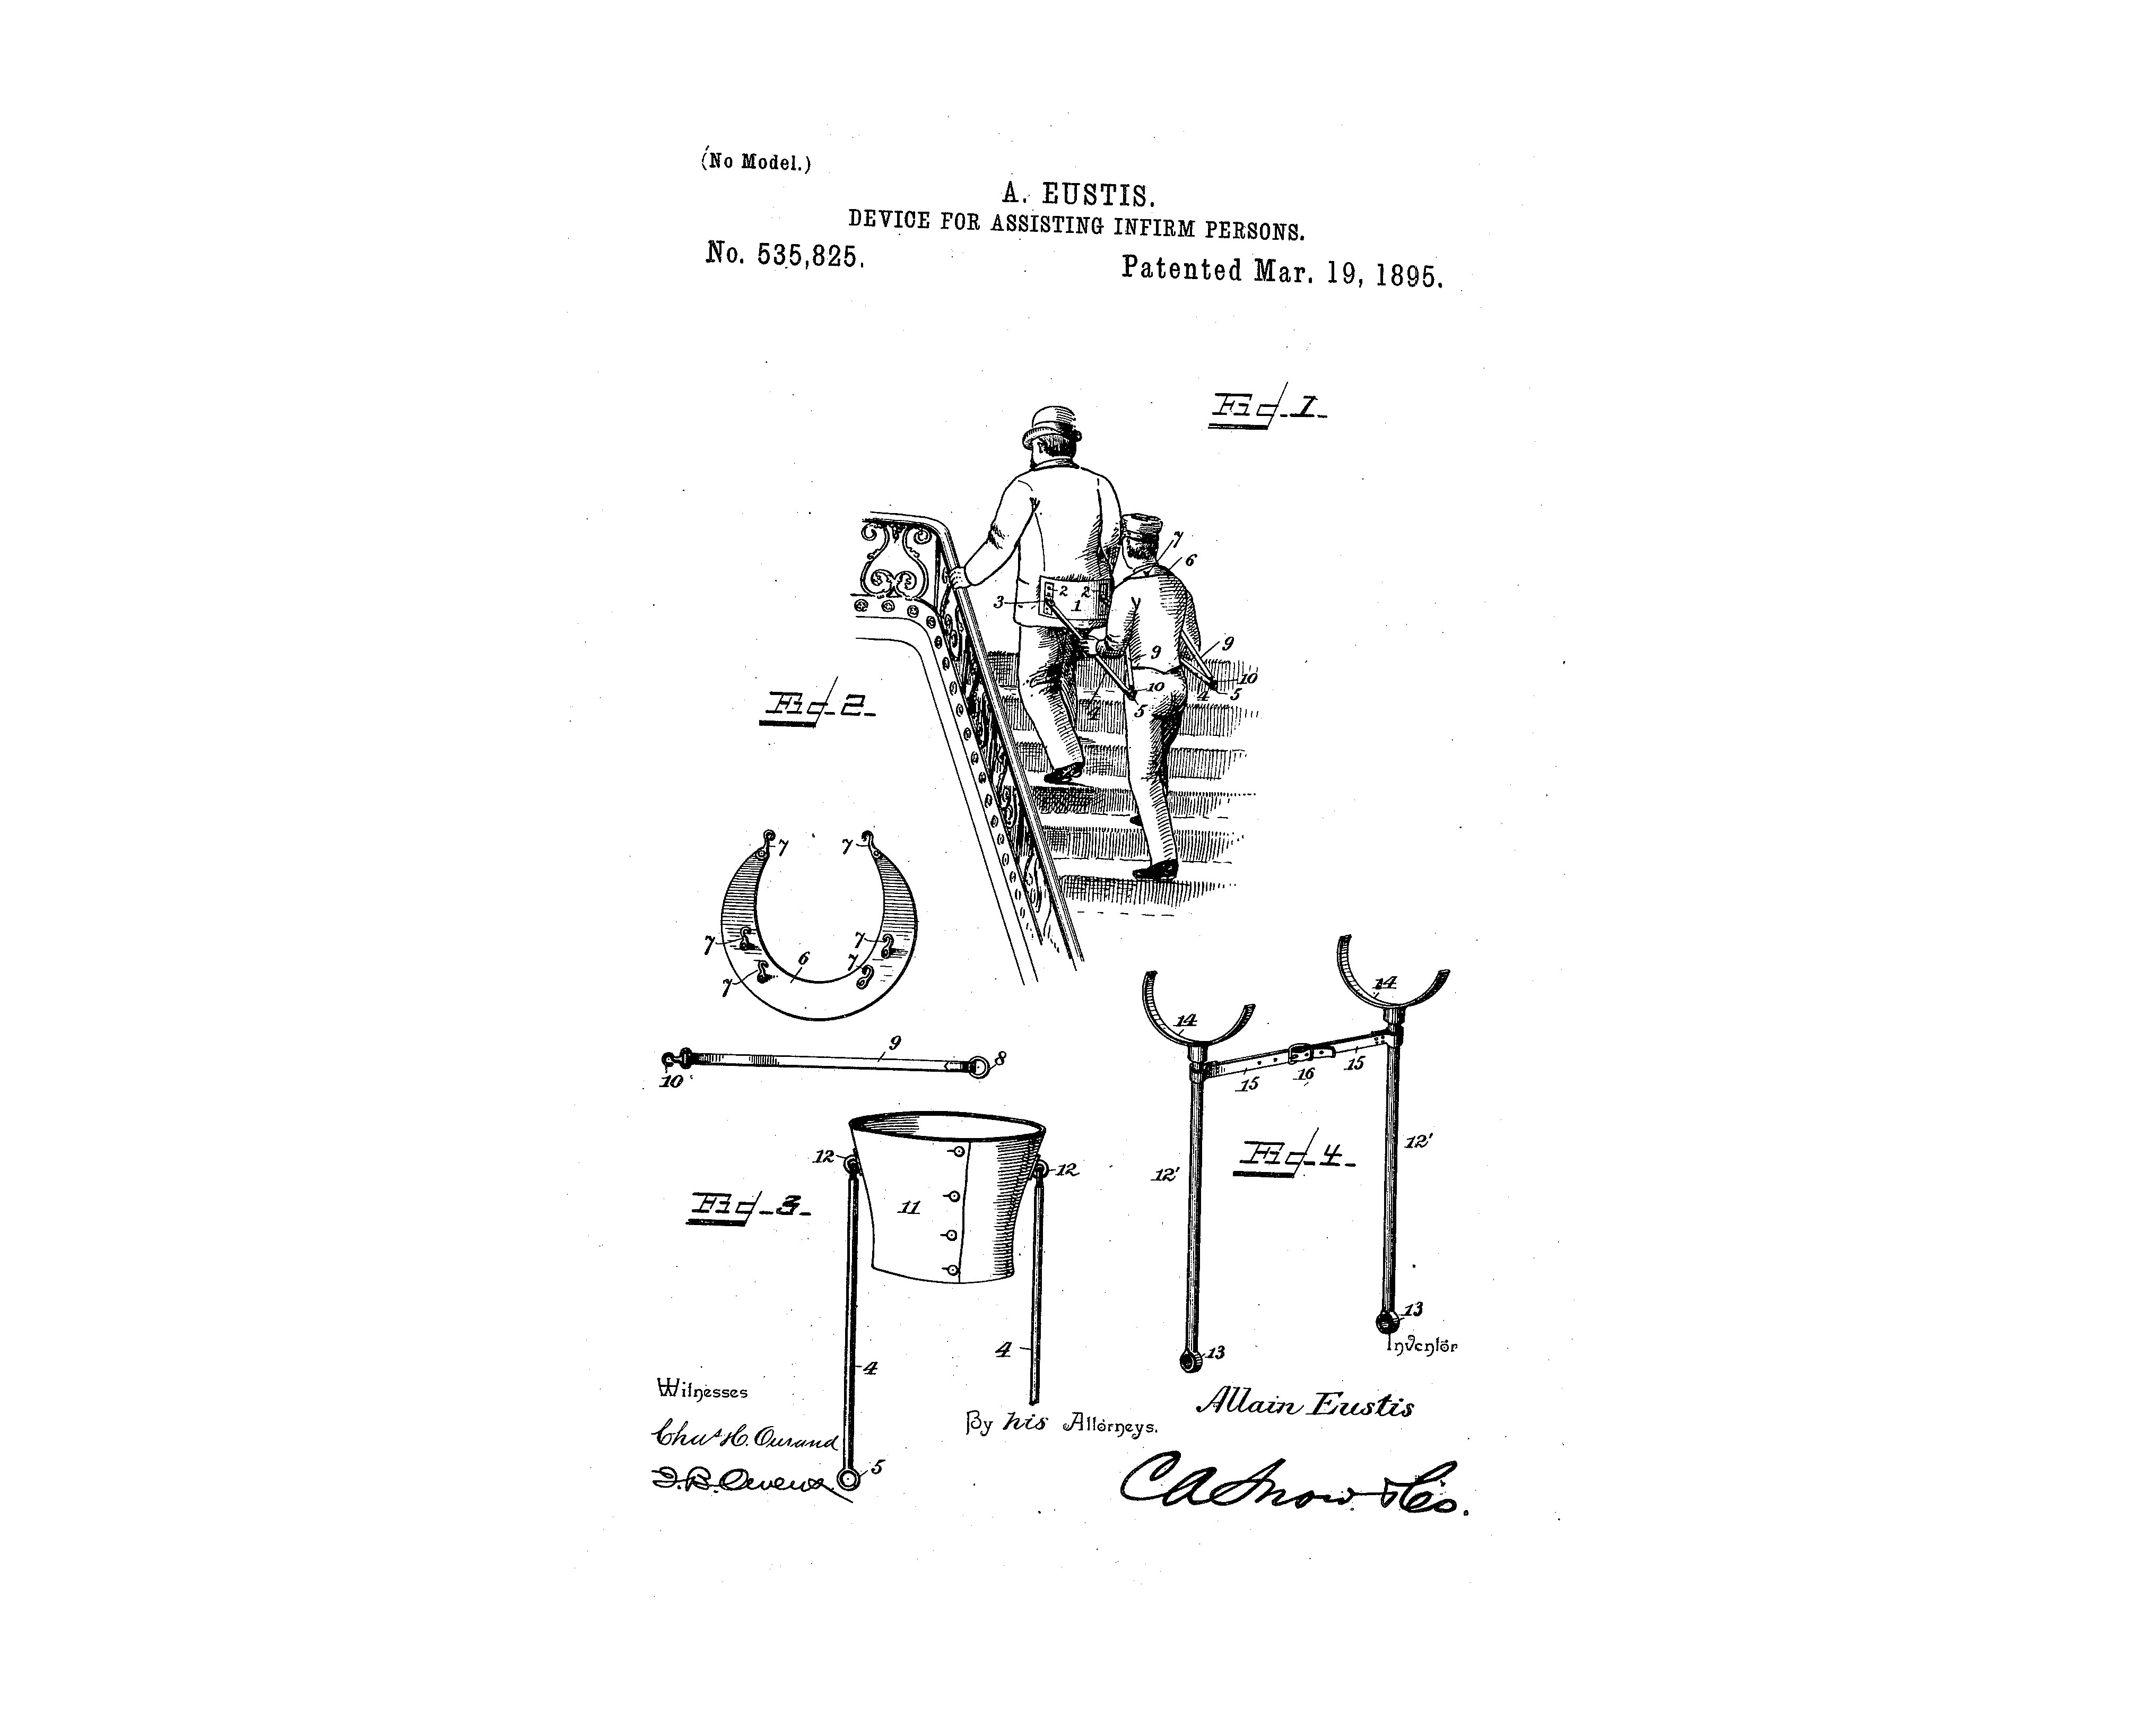 Device for assisting infirm persons, patent no. 535, 825, 1895.